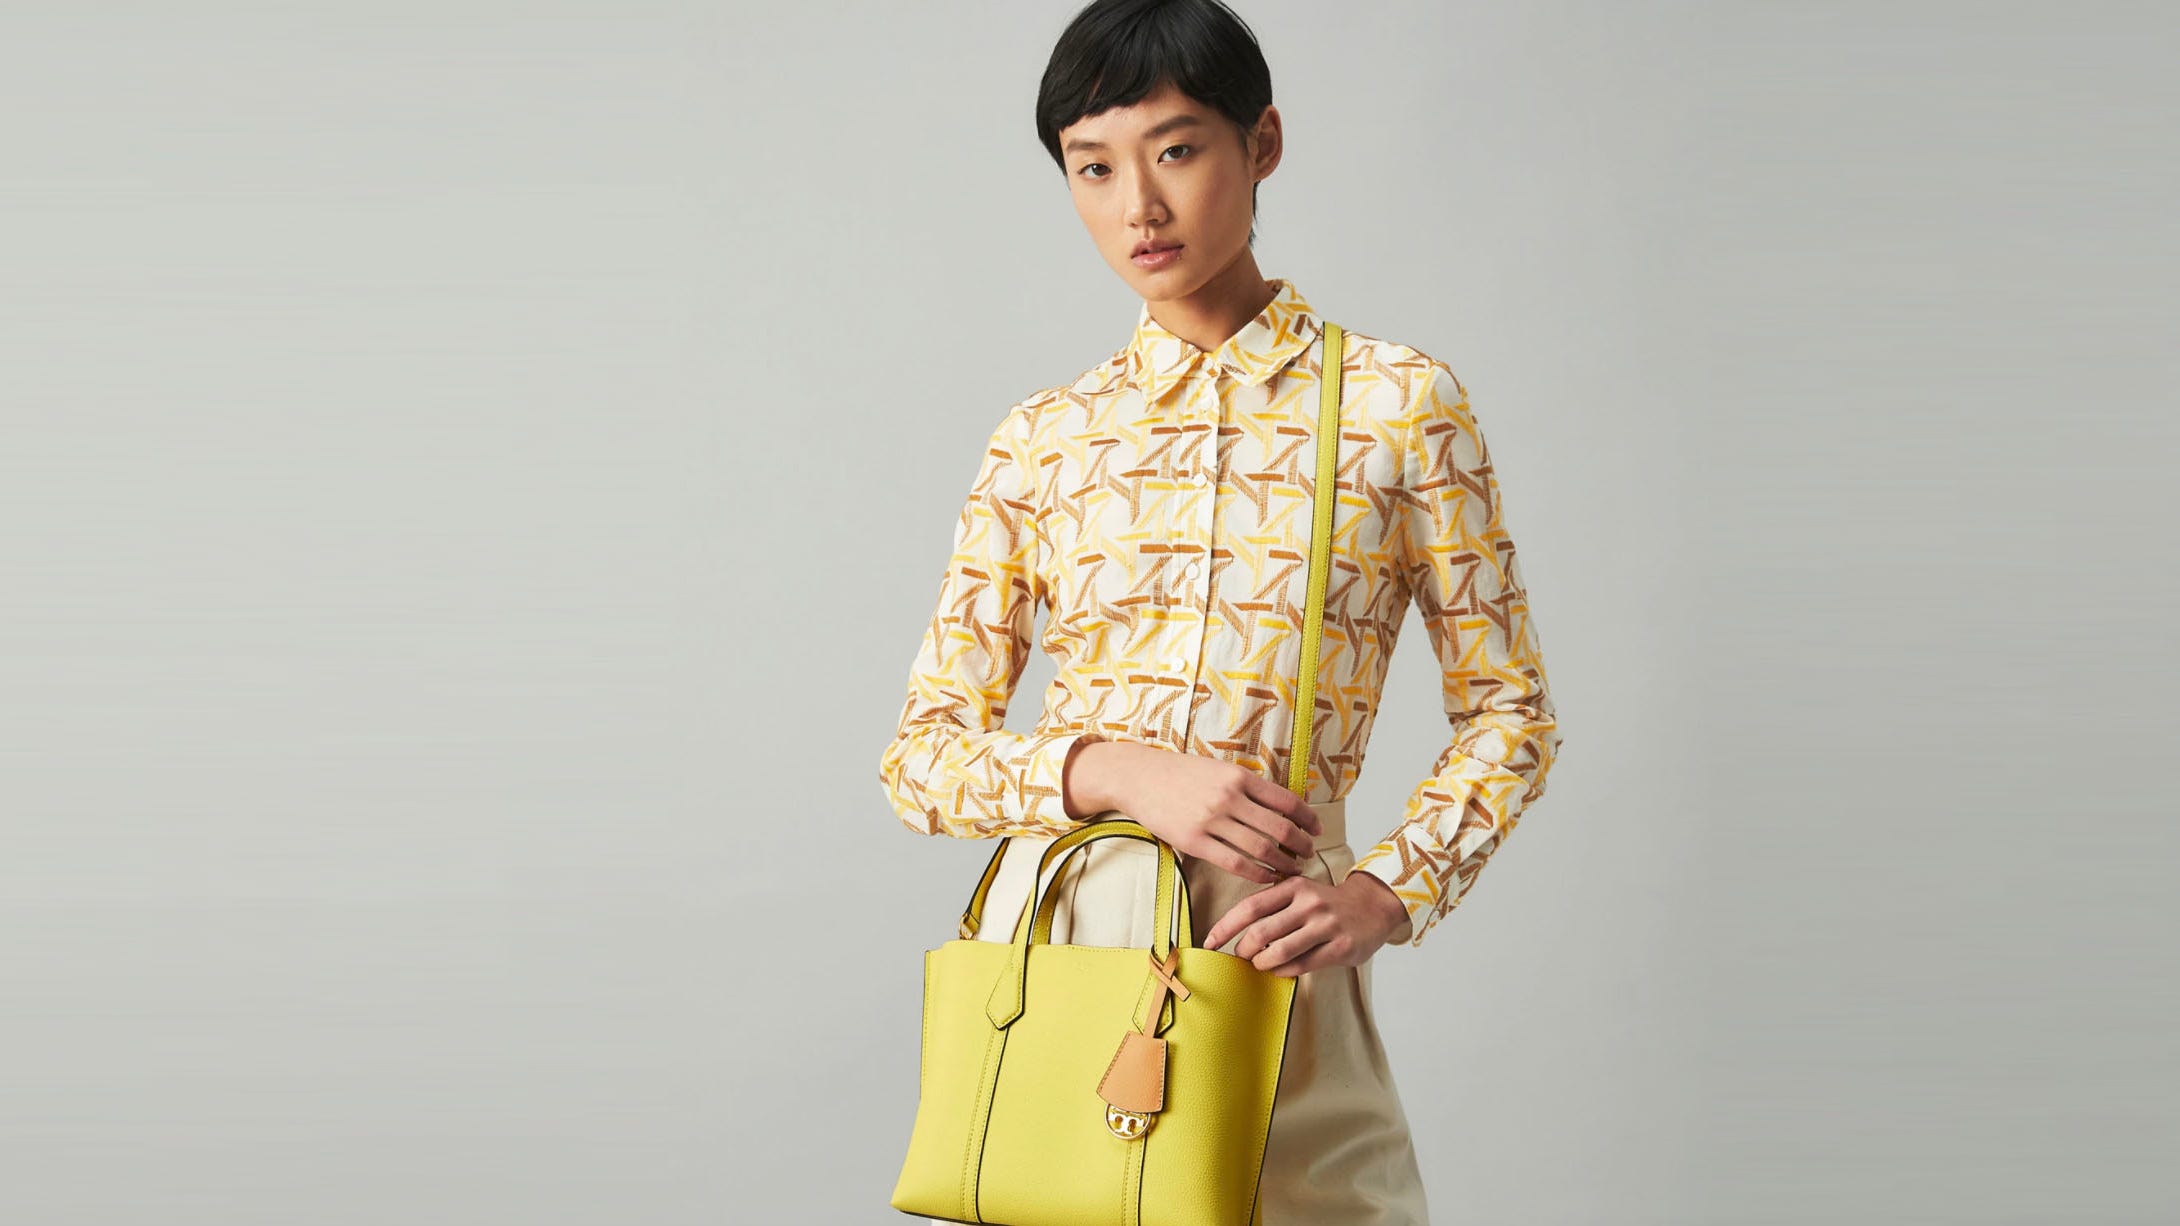 4th of July sale: Get huge price cuts at the Tory Burch Semi-Annual Sale